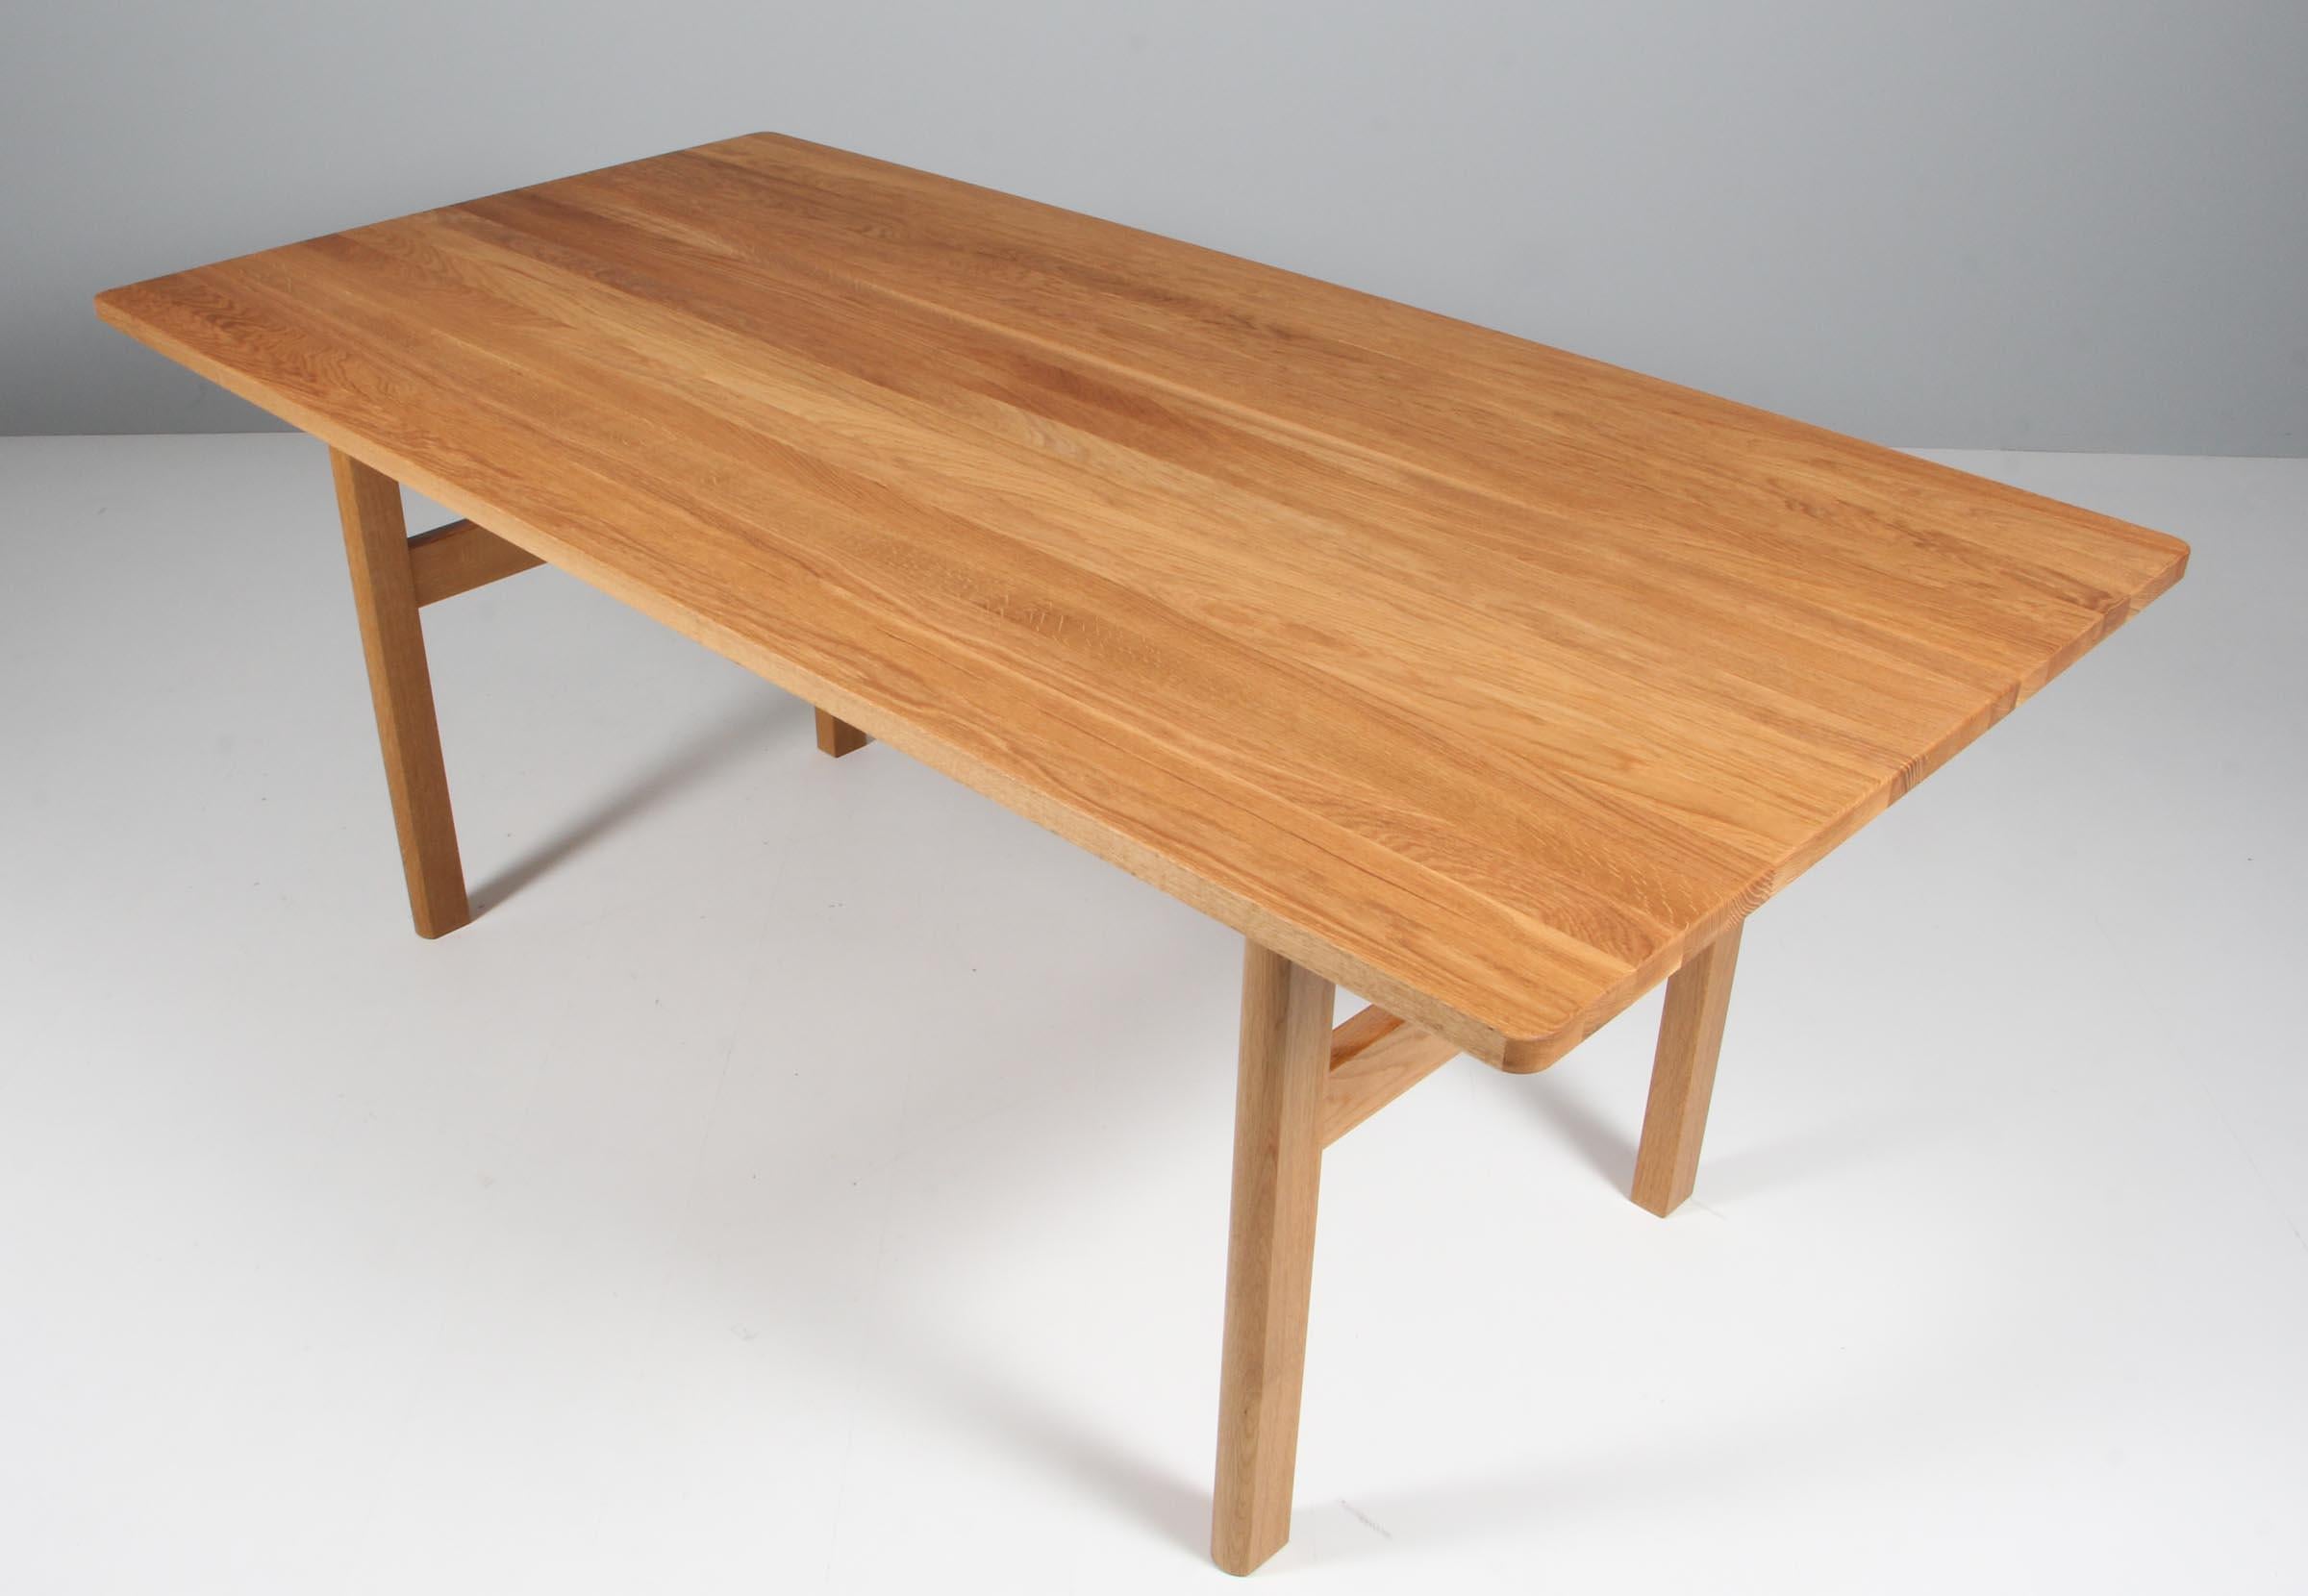 Børge Mogensen shaker dining table in solid oiled oak.

Made by Fredericia furniture, model 6284.